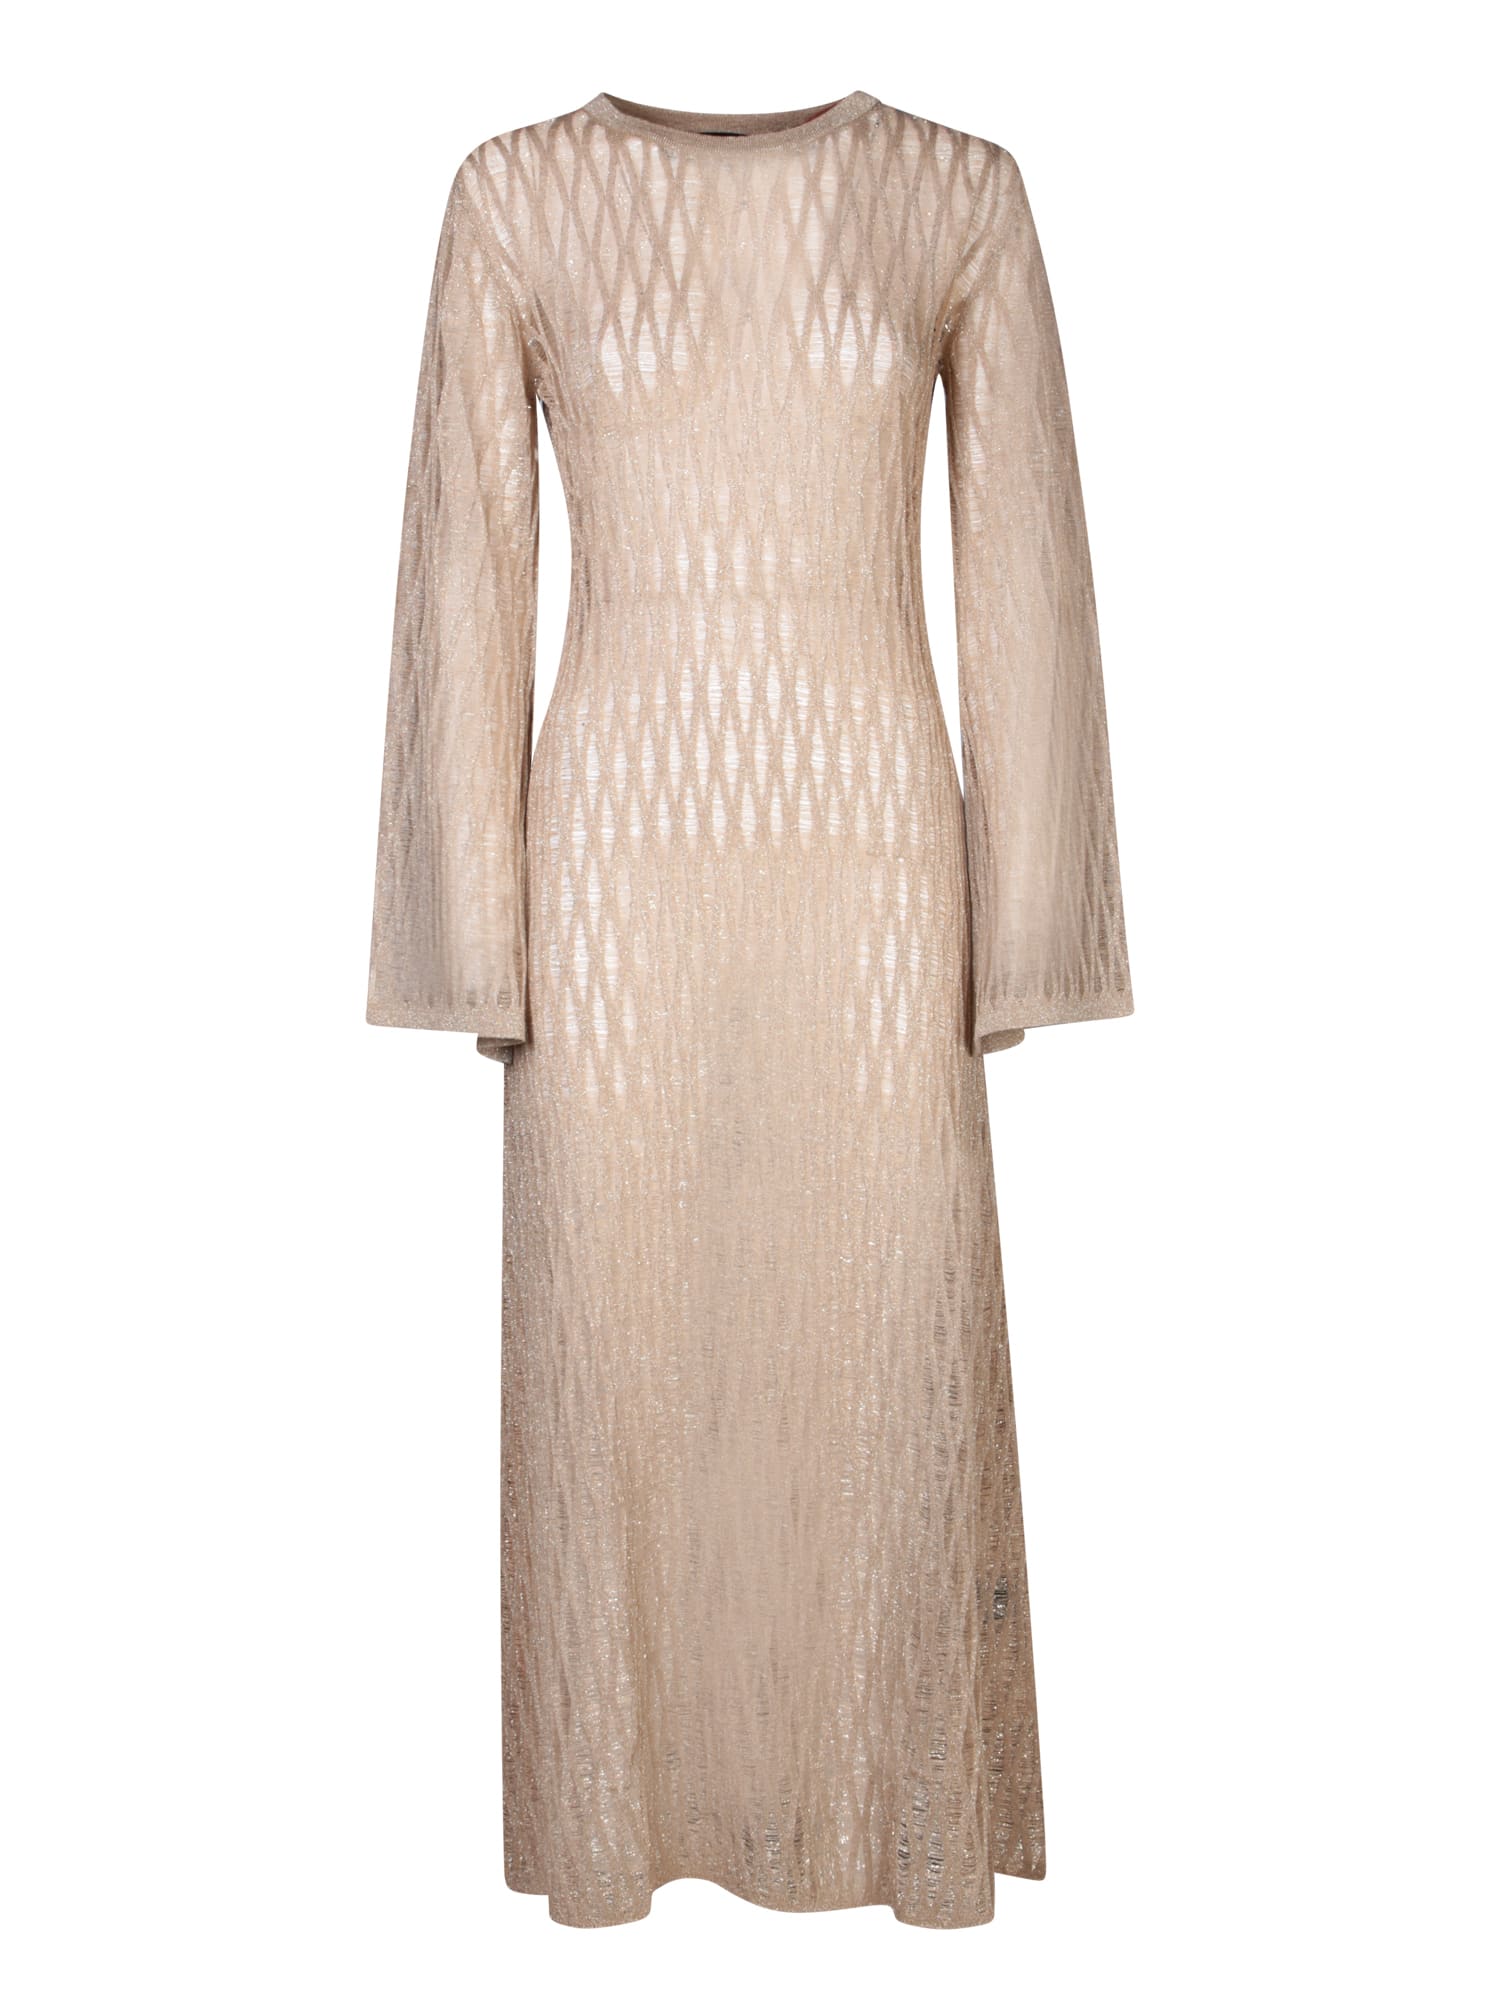 Gold Perforated Knit Long Dress